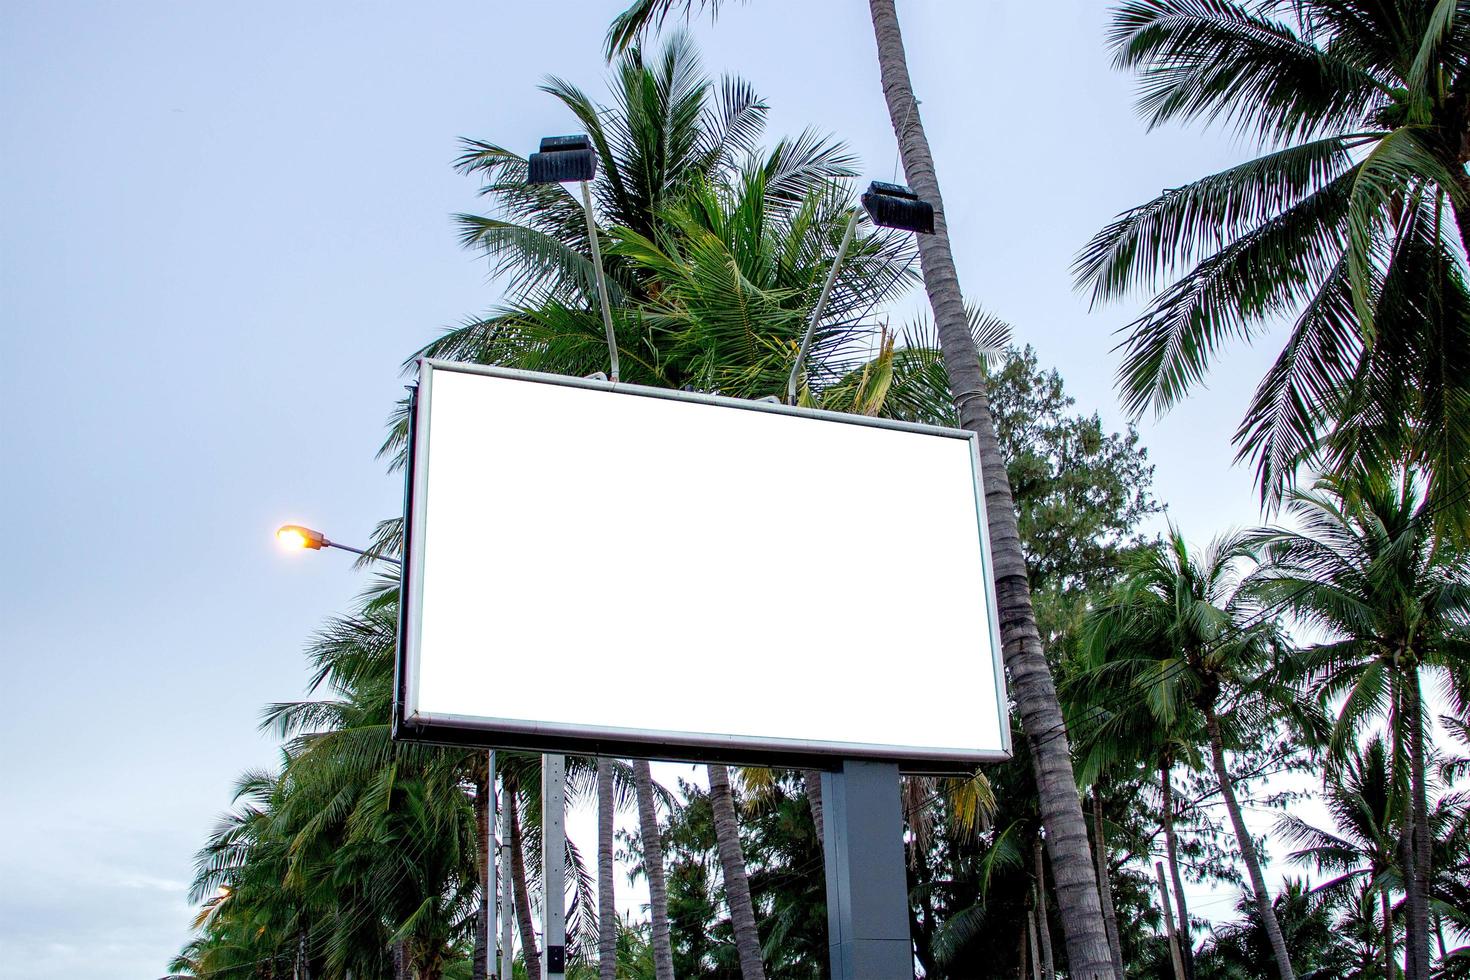 Roadside billboards on the beach with tons of coconuts in the background lights sky photo